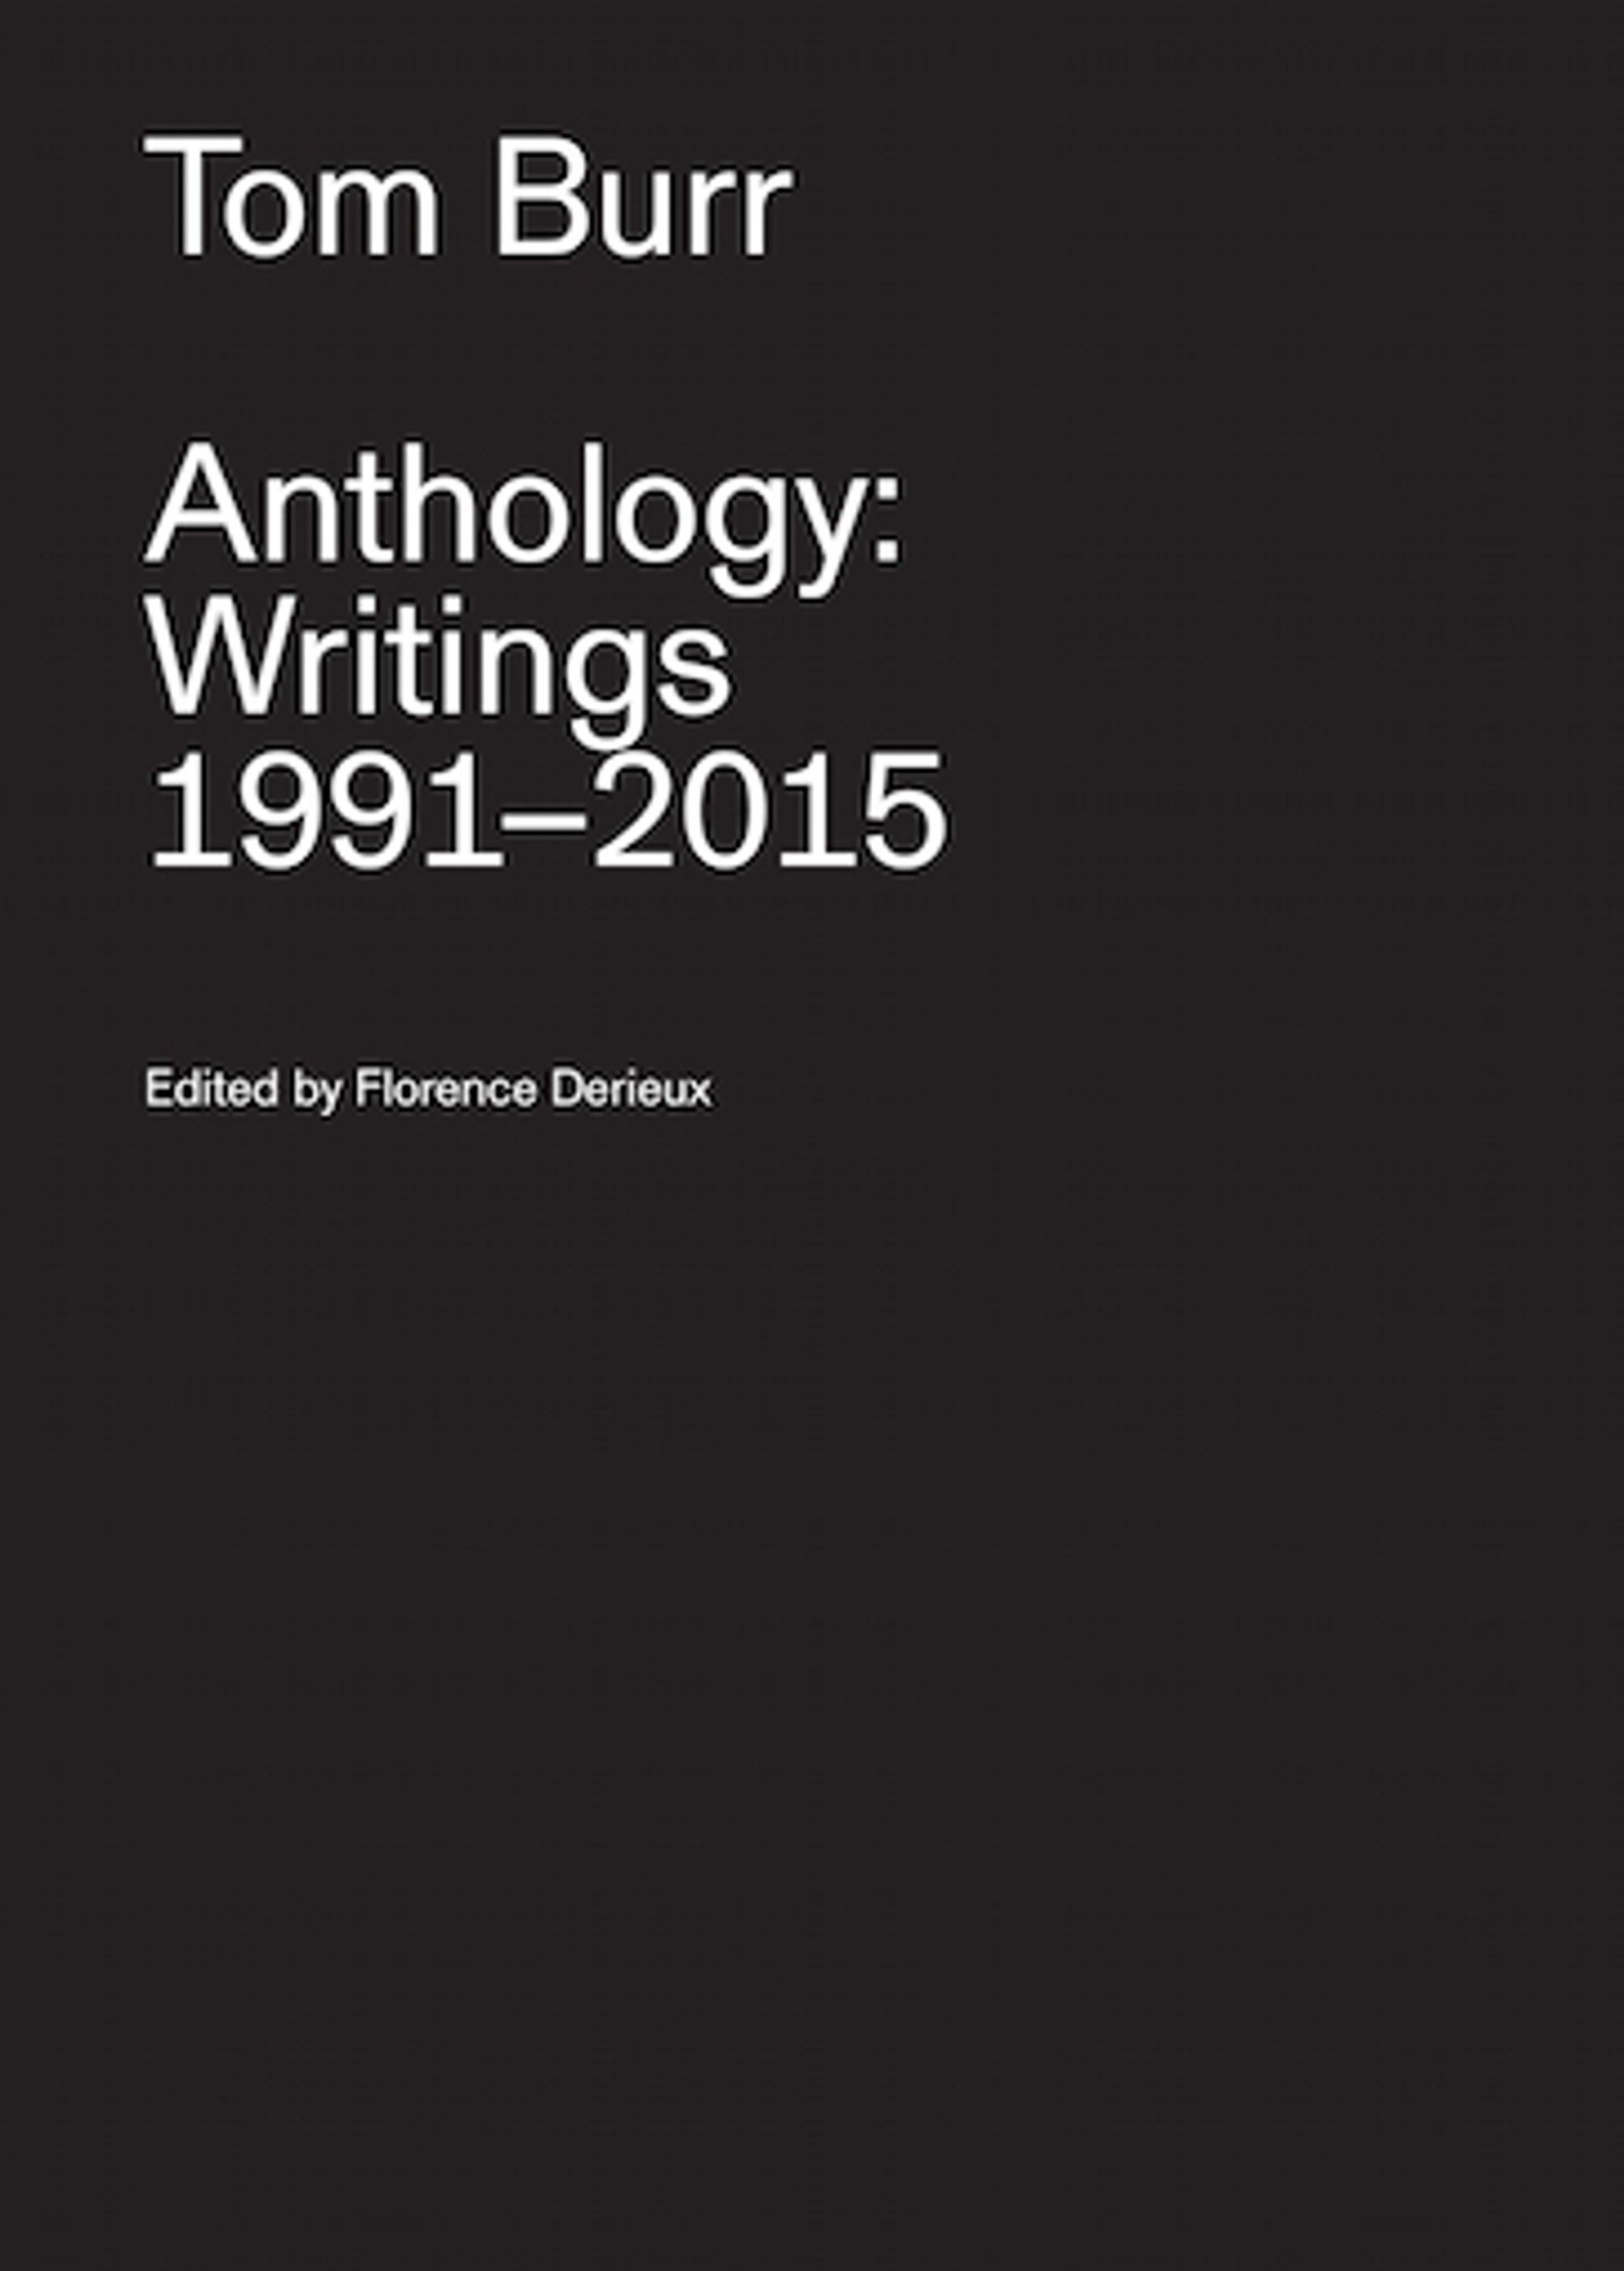 Detail view of Tom Burr Anthology: Writings 1991 – 2015 against a plain gray background